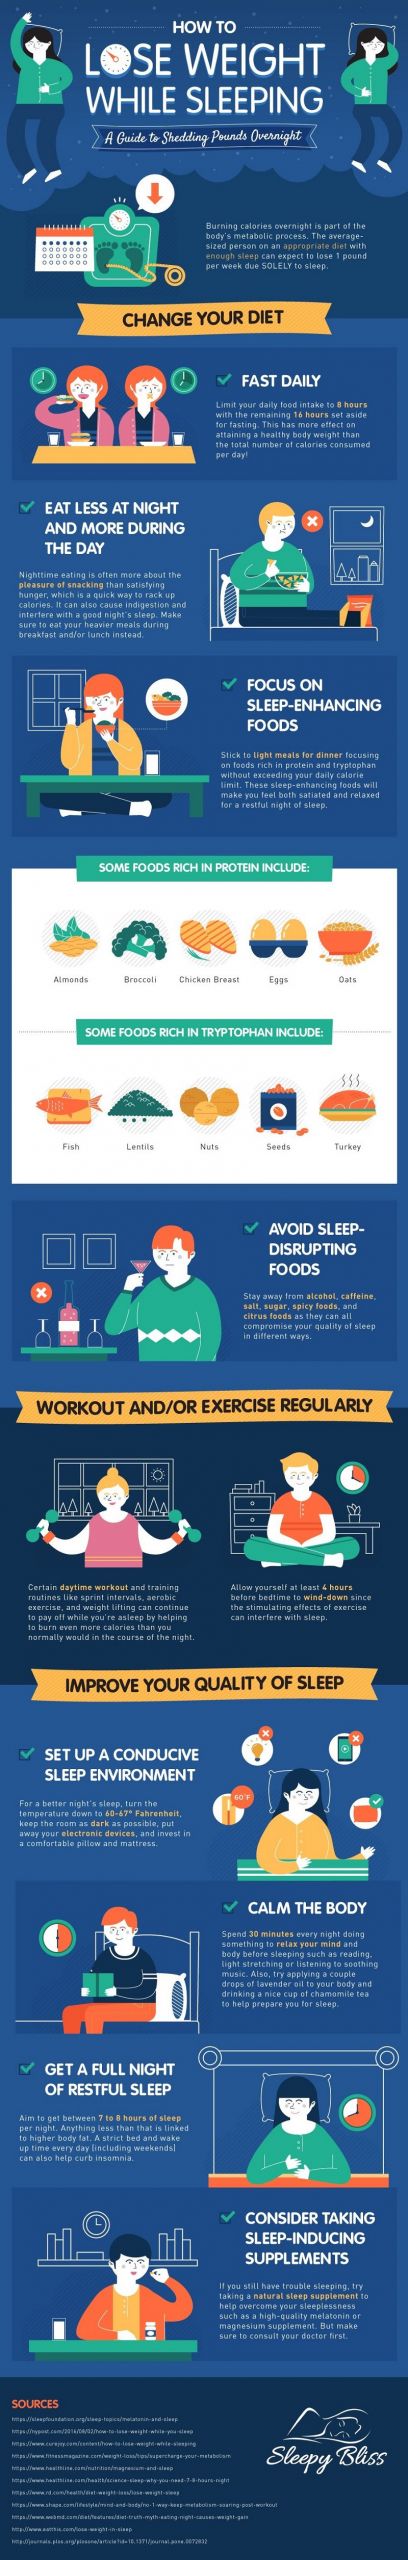 How To Lose Weight While Sleeping
 How to Lose Weight While Sleeping